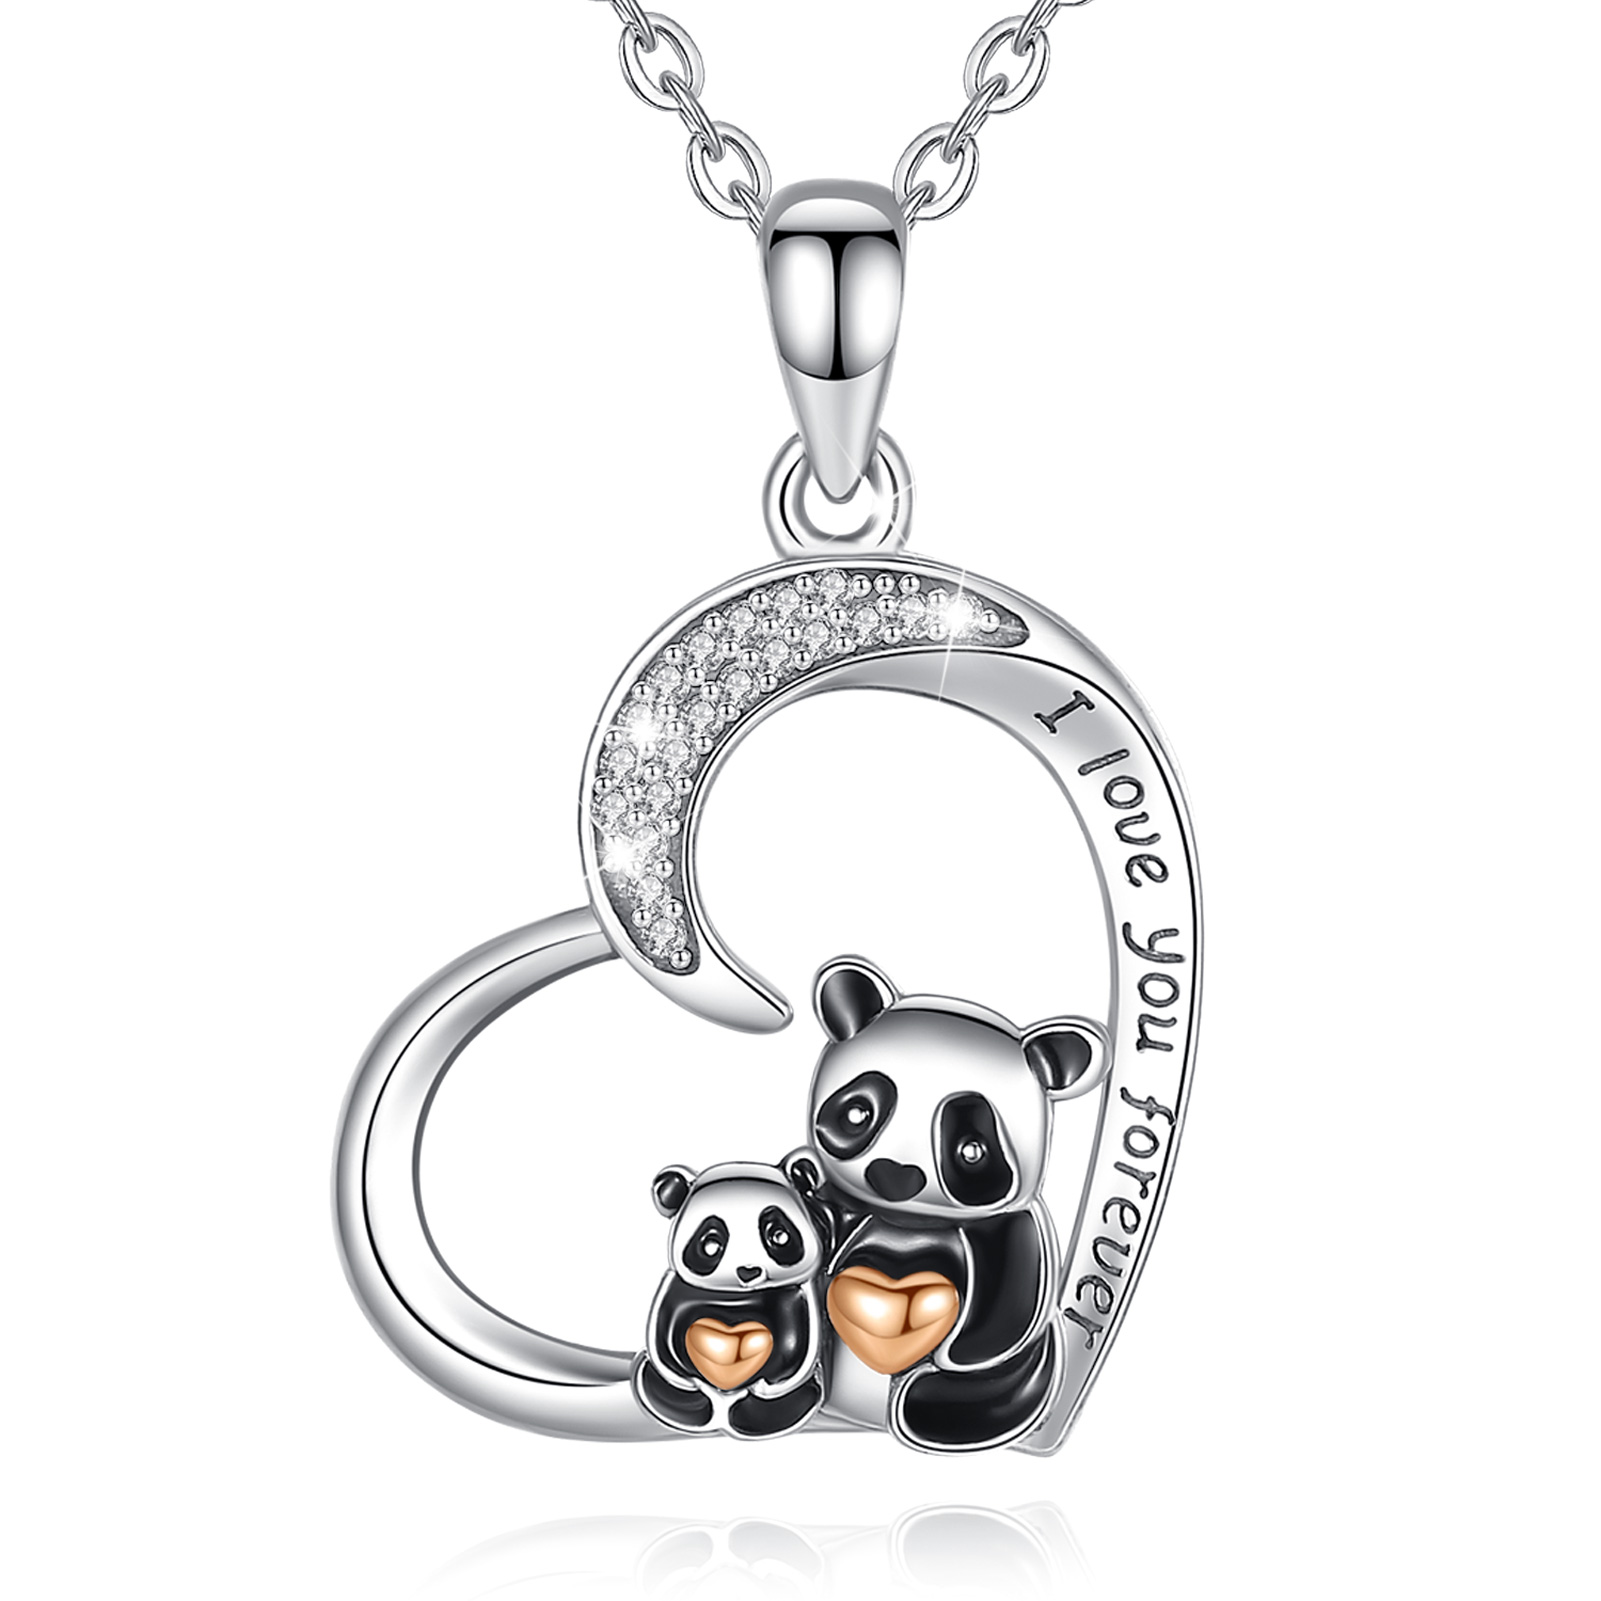 Merryshine Jewelry S925 Sterling Silver Panda Heart Pendant Necklace For Mothers Day Gifts Necklace